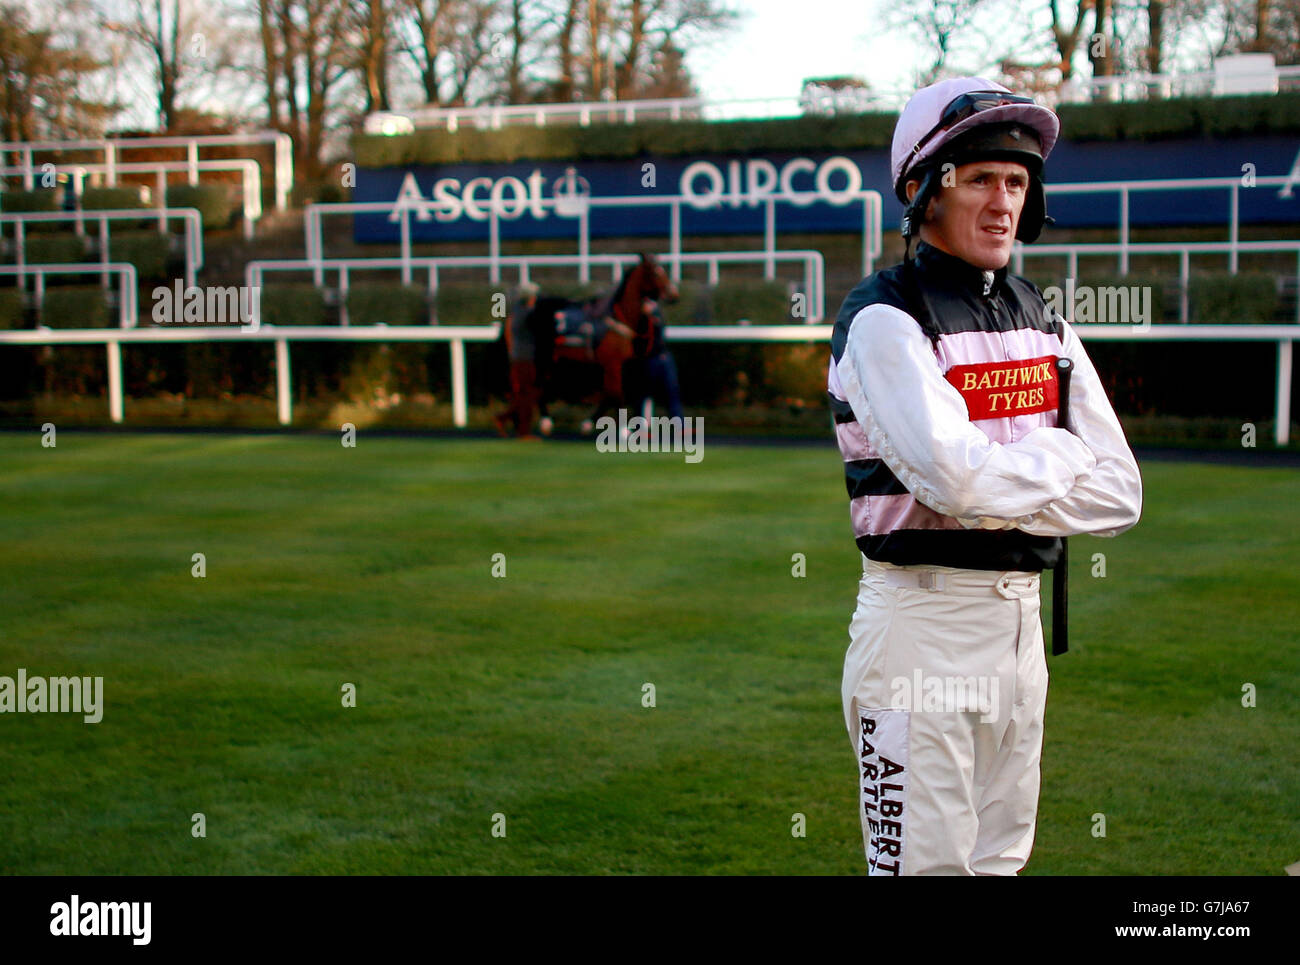 Horse Racing - 2014 Christmas Meeting - Day One - Ascot Racecourse. Jockey A.P.McCoy on day one of the 2014 Christmas Meeting at Ascot Racecourse. Stock Photo